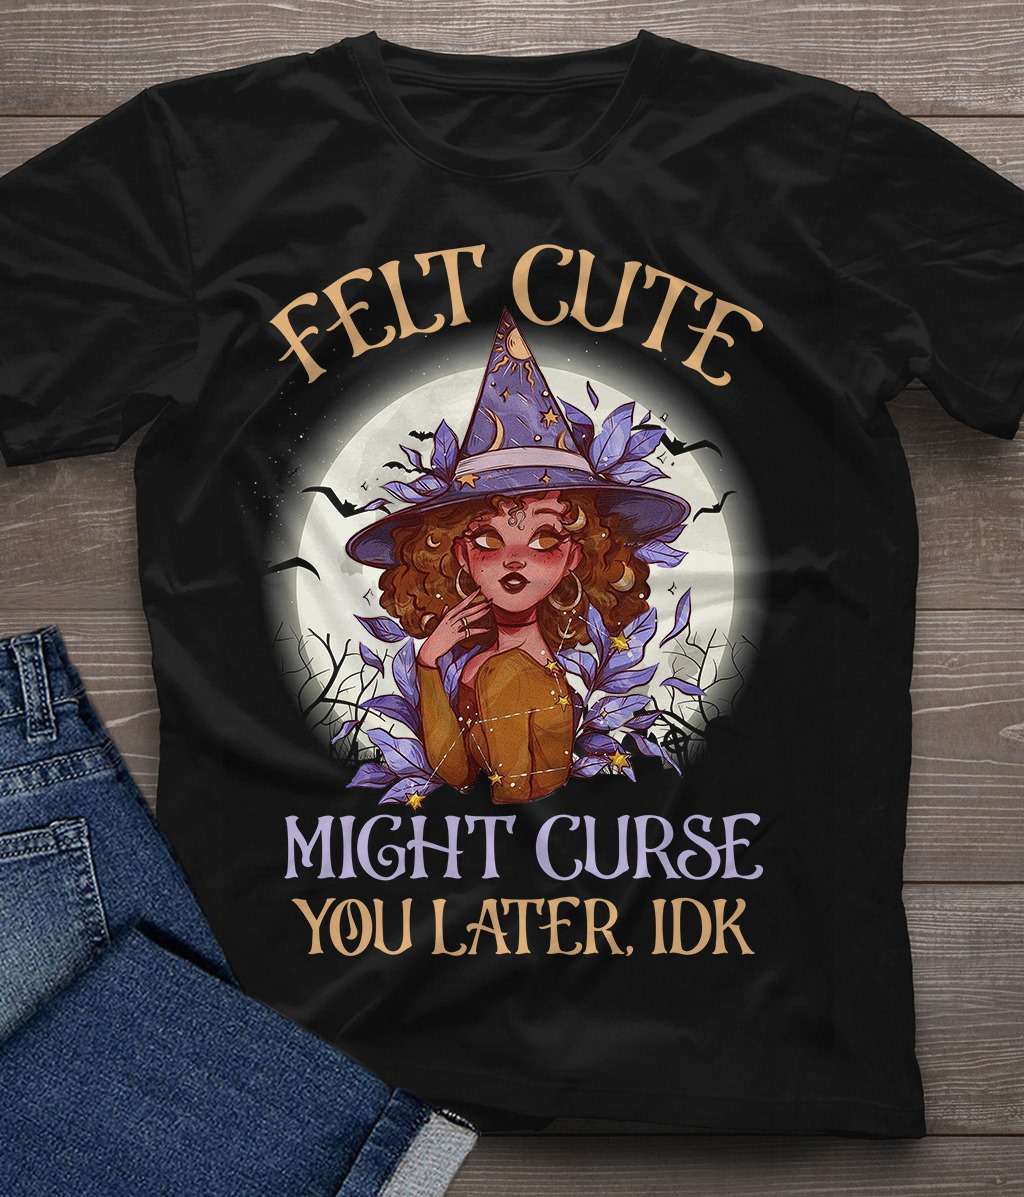 Felt cute might cute you later - Beautiful witch, Halloween witch costume